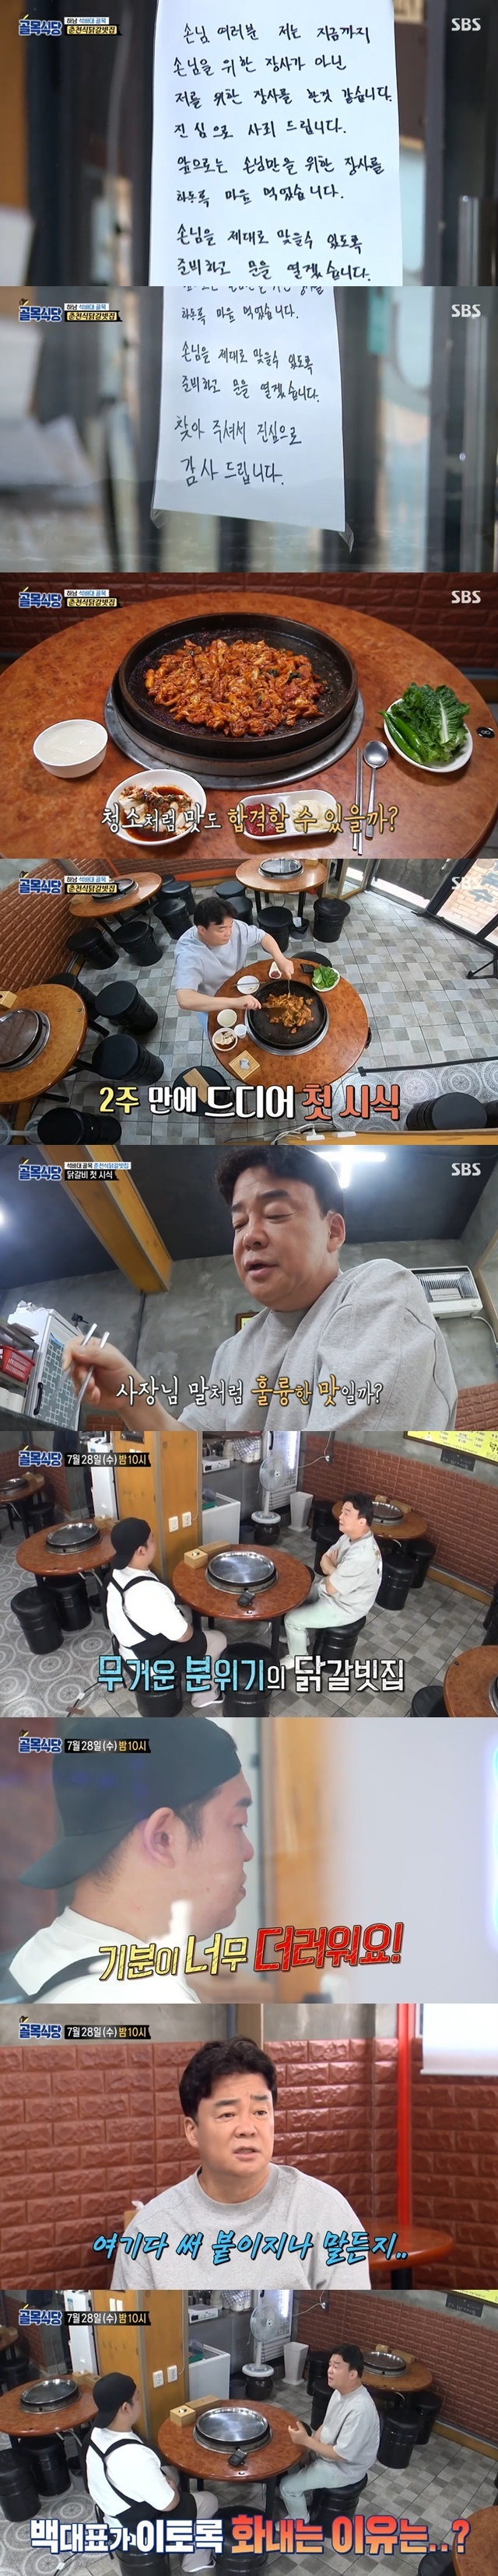 Baek Jong-won heralded a second Furious at a chicken ribs homeOn July 21, SBS Baek Jong-wons The Ally Restaurant was the second story of Hanam Seokbadae Alley.In the last broadcast, Baek Jong-won first visited Chuncheon-style chicken ribs and gave up tasting because of hygiene.Baek Jong-won pinched trash in an ice cream refrigerator, especially in the hall where the boss stayed, and a dirty doghouse hidden under a guest table.On the same day, it was revealed that the first reason Baek Jong-won refused to sample was because of the spider web and dust next to the table baro.This is a customer deception, said Baek Jong-won, and it is the end of the restaurant that came out of the alley restaurant.The boss and mother wept at the bitter sound of Baek Jong-won, and on the second visit next week, they attracted attention with their internal structure changed.The kitchen next to the bathroom baro was pulled forward, and the place where the original kitchen was became a warehouse.I thought there was nowhere to clean it, but there was nothing I didnt have to clean, the president said, cleaning my store himself.I think Ive done Vic-Fezensac for me, not for guests, so far, the president said in front of the store.In the future, I decided to do a Vic-Fezensac for guests only. Ill prepare and open the door to get the guests right.I am sincerely grateful for your visit. Baek Jong-won finally decided to sample chicken ribs after his second visit.When Baek Jong-won ordered additional Udon Sari, the president boiled the Udon Sari in a long time, and Baek Jong-won said, I did not go into The Kitchen. Did not you see The ally restaurant?Plastic socuries are not hot, they come with environmental hormones. When Kim Sung-joo asked, What do you think the taste evaluation is going to be?, The president, who served only to Sari and went up to the situation room, expressed confidence in the taste.The broadcast ended on the same day when Baek Jong-won was about to taste the chicken ribs in two weeks.The chicken ribs that have suffered a crisis due to hygiene problems have now made me expect to improve day by day.But in the trailer that followed, Baek Jong-won told the boss, Thats ridiculous. I think I might have been deceived. I feel really dirty.You have to live a double life for the rest of your life, he said, and also portrayed Furious.